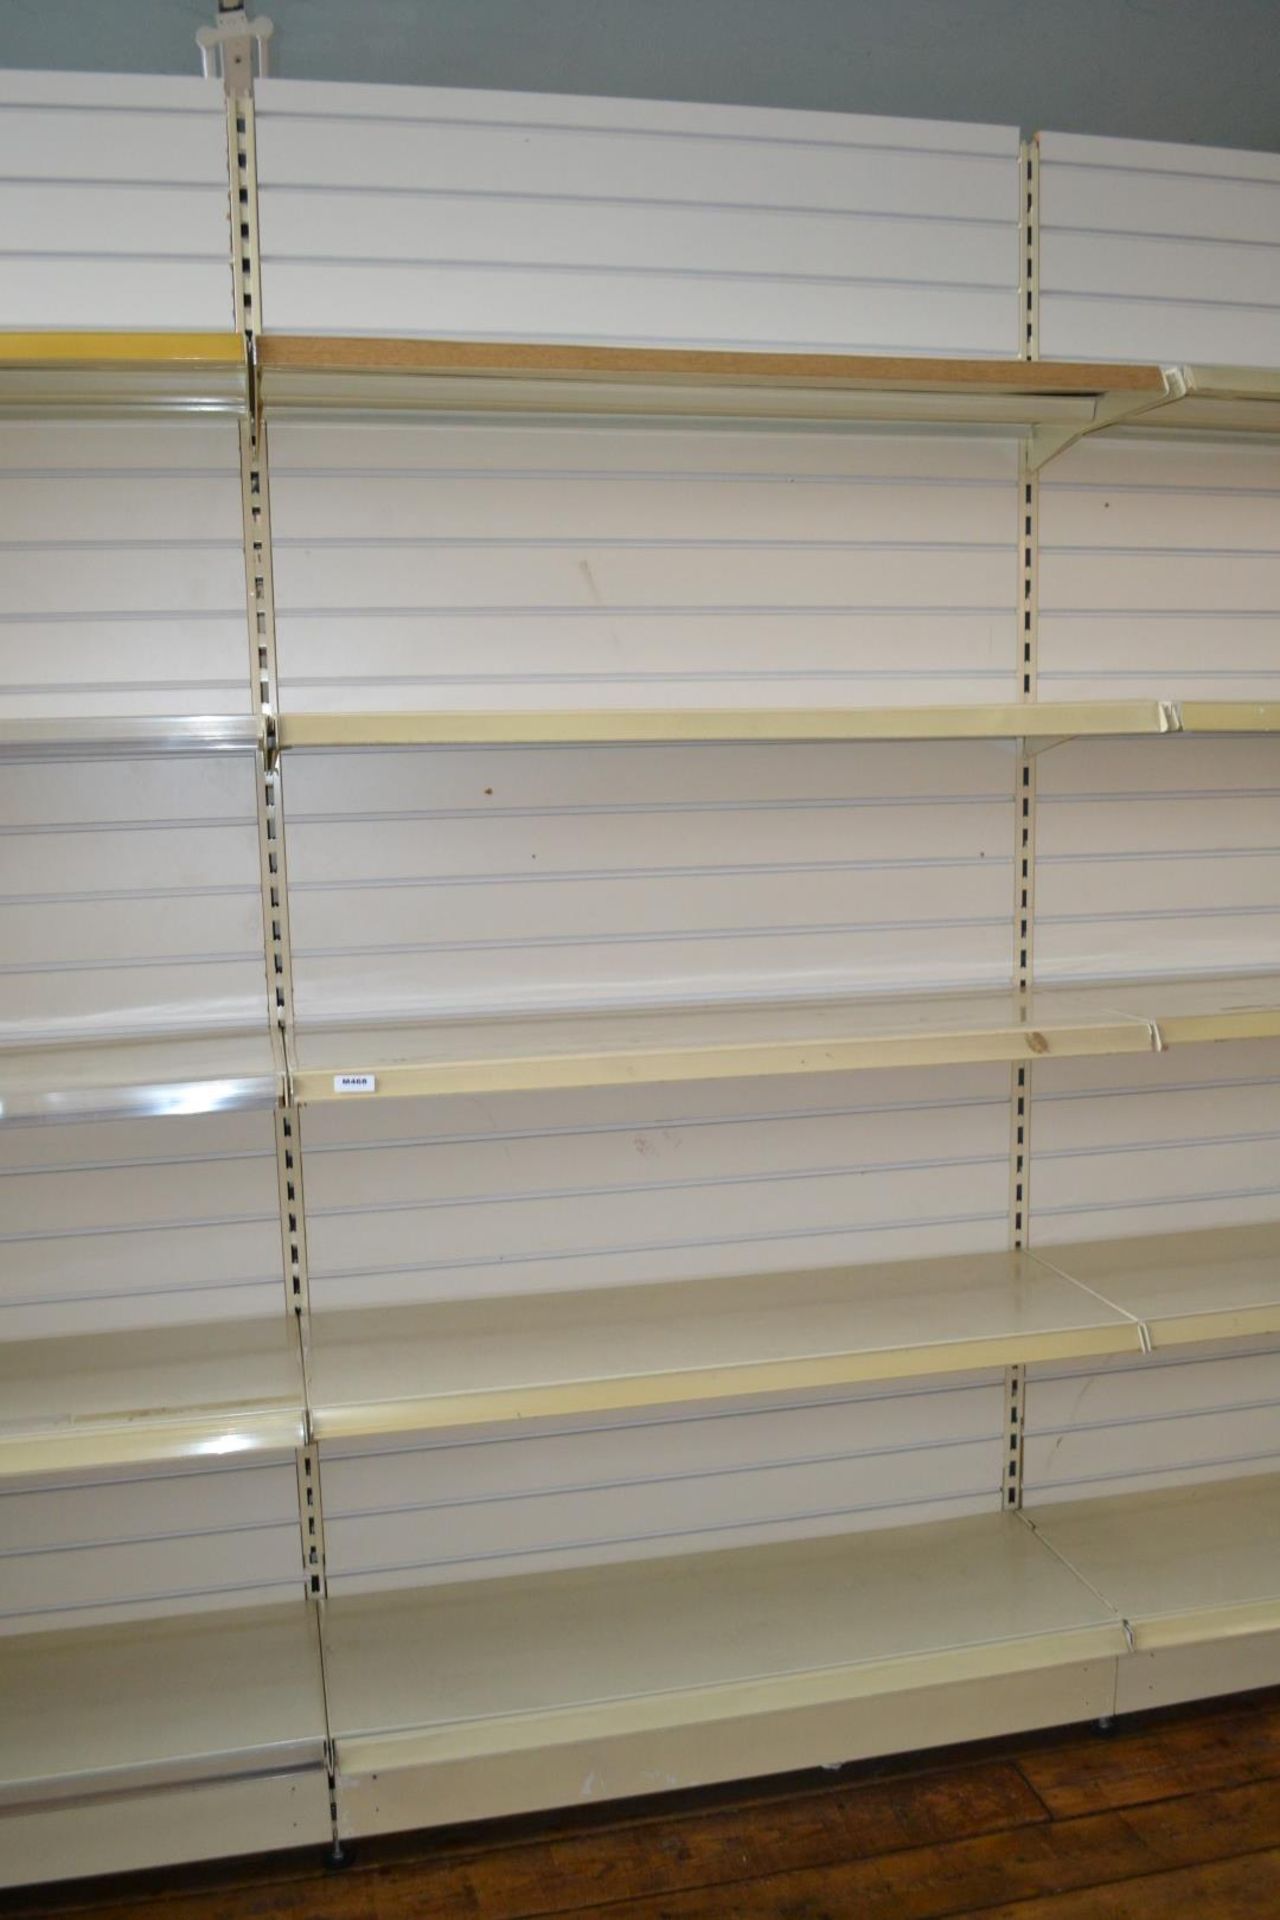 1 x Slatwall With Shelving - Approx. Total Dimensions: W480cm x H249cm - Buyer To Remove - Image 4 of 6